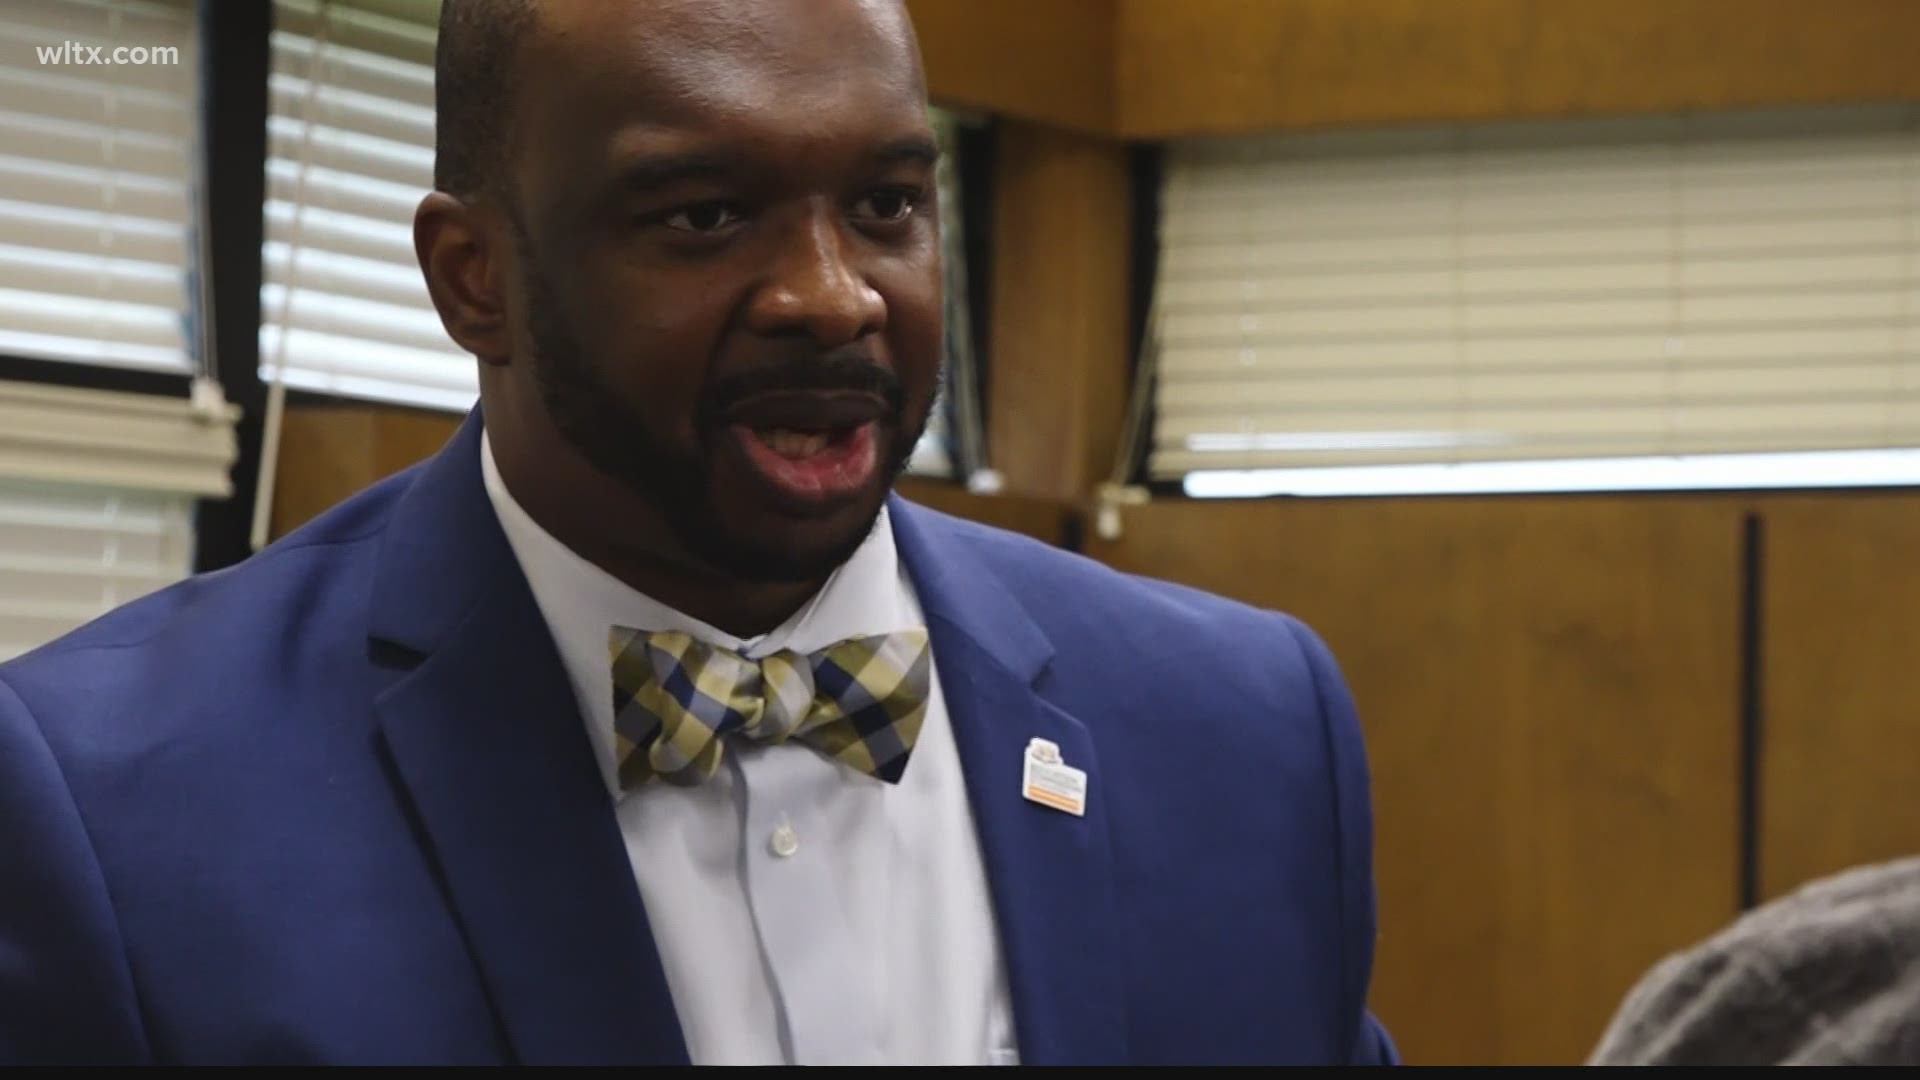 Lexington Richland School District Five has named former Chapin High Principal Dr. Akil Ross as the district's interim superintendent.